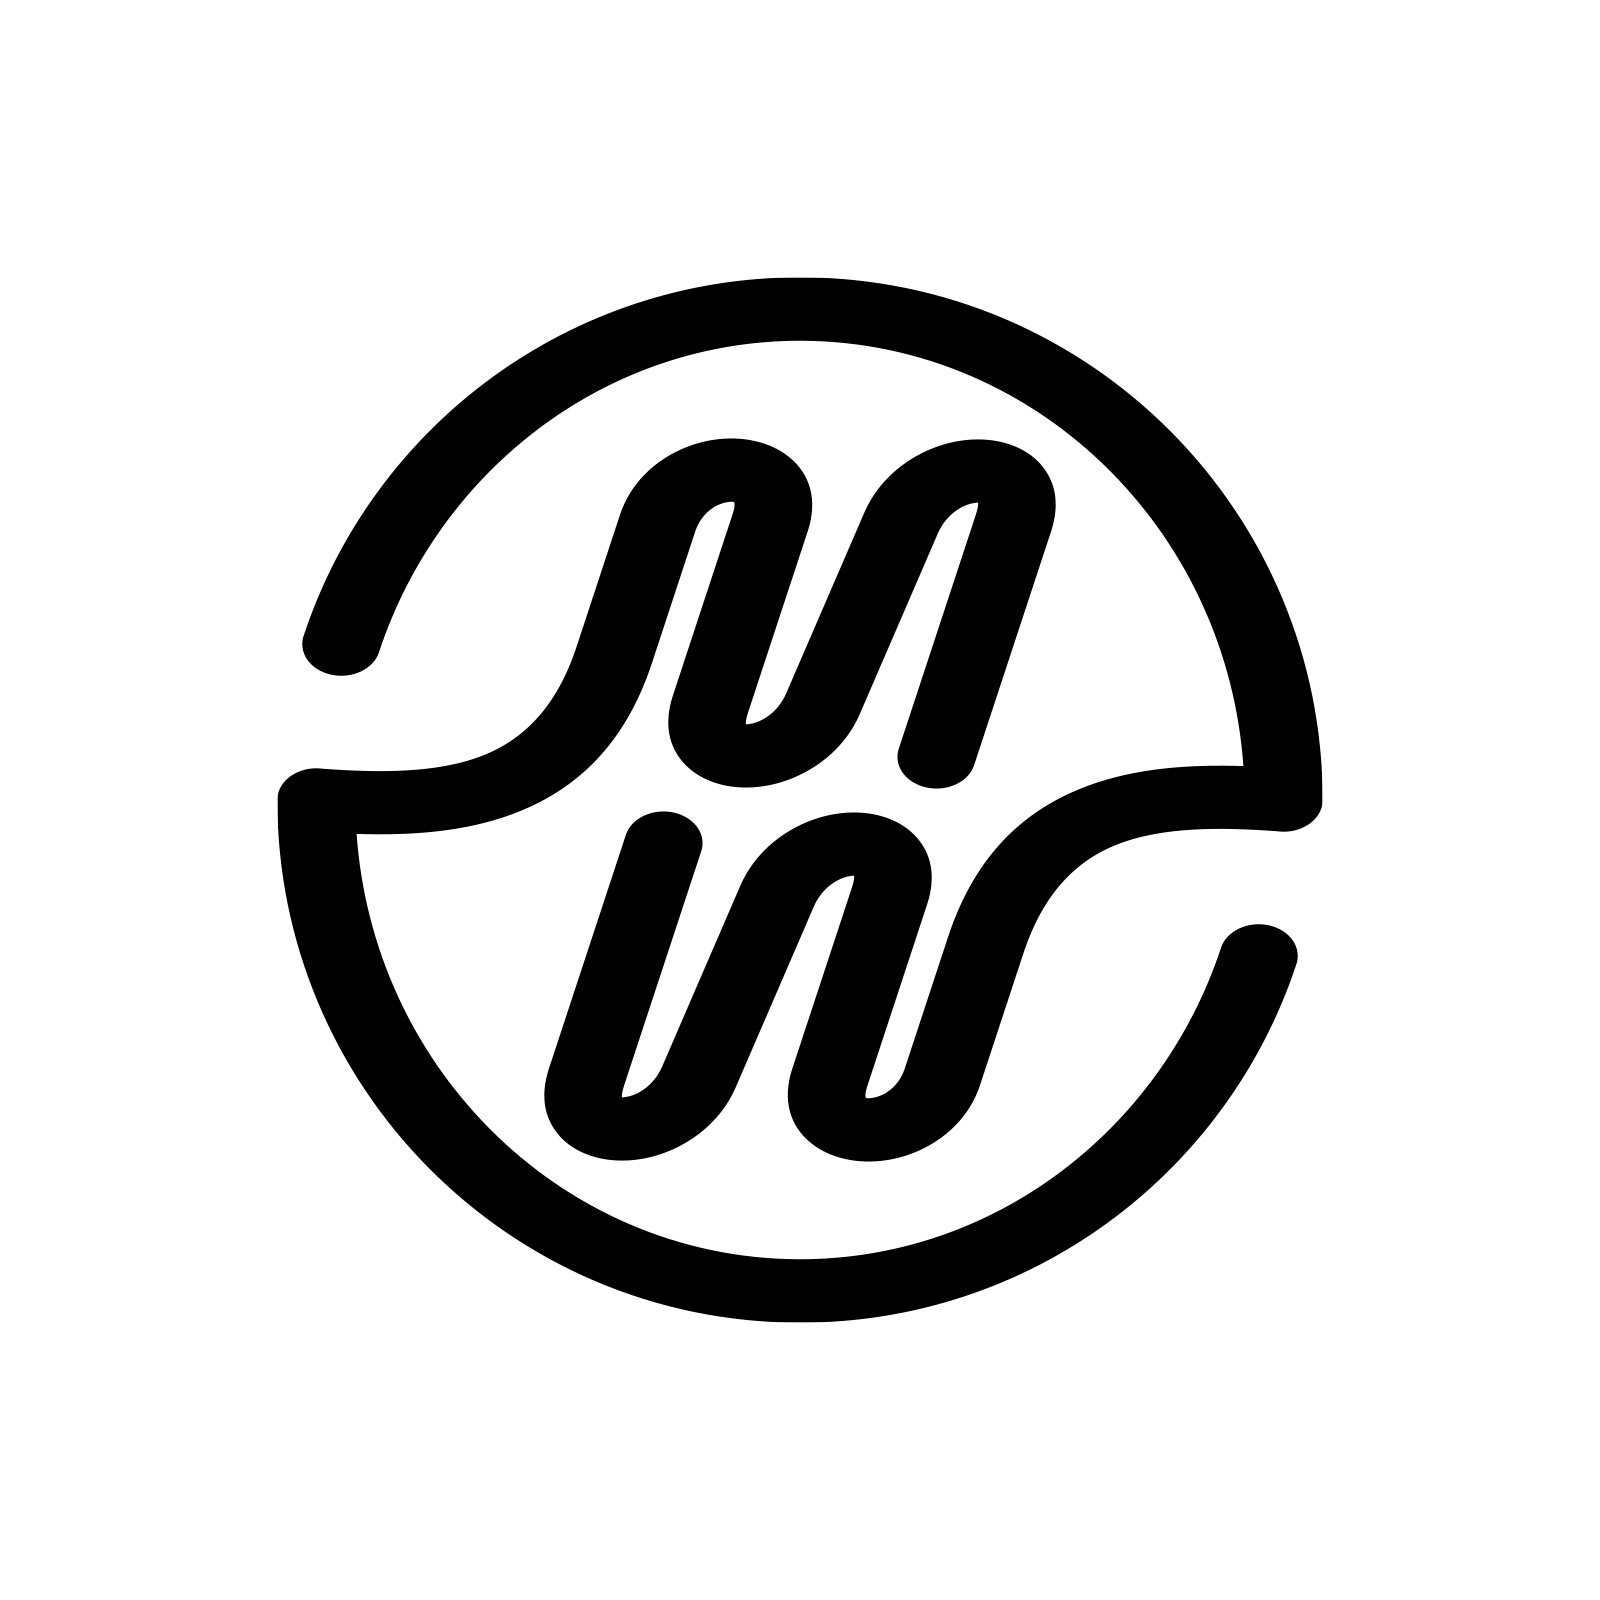 MW logo design by logo designer Stanislav+Regis for your inspiration and for the worlds largest logo competition